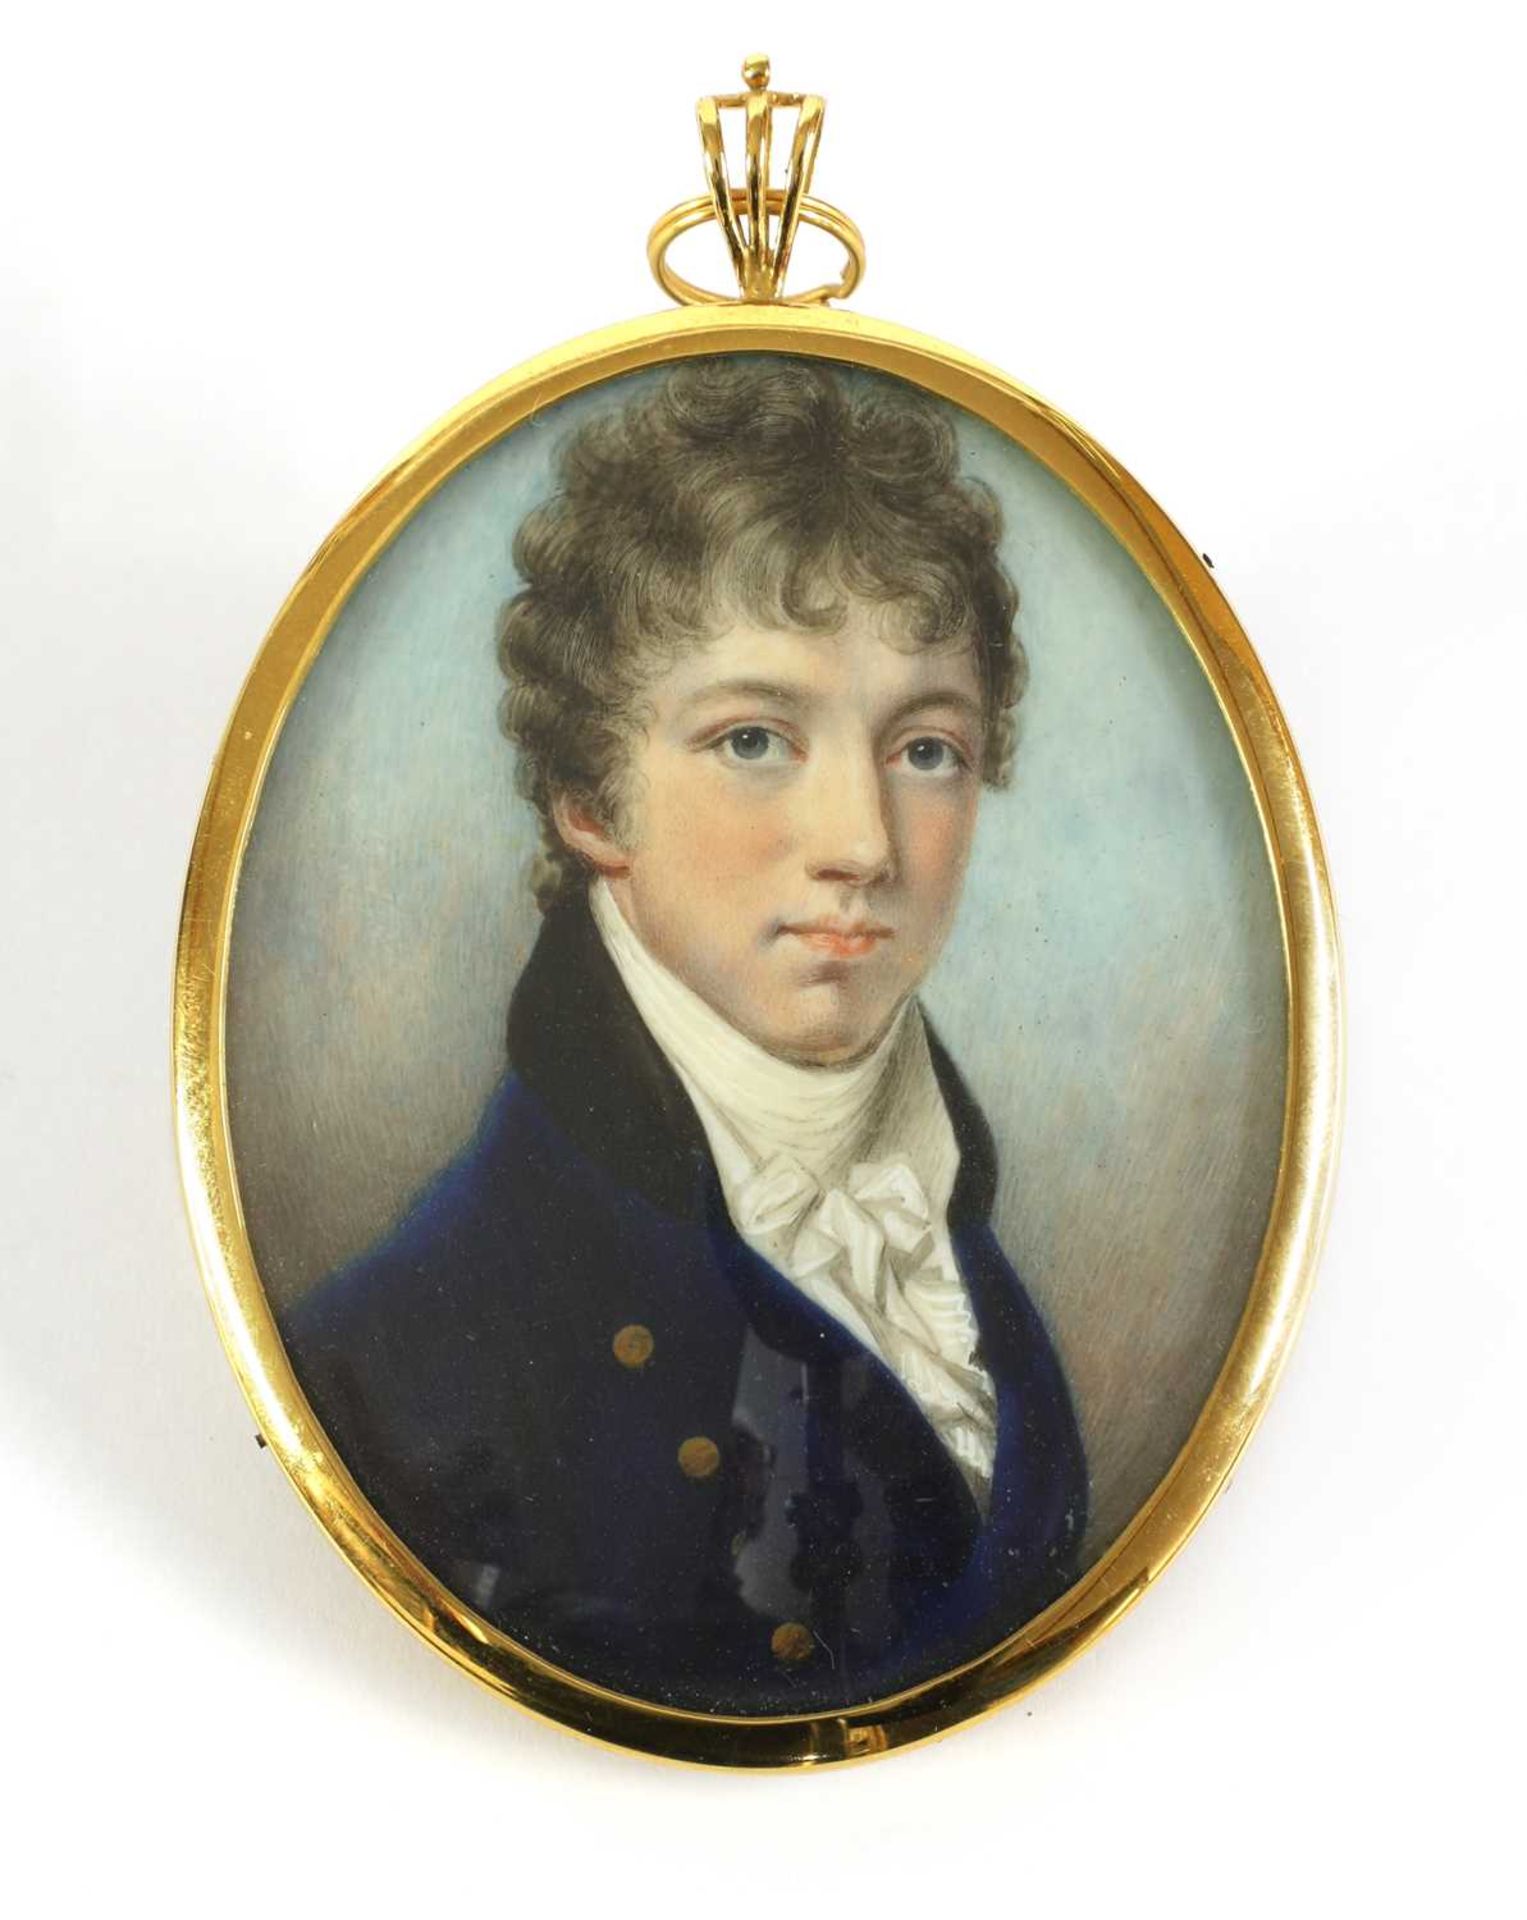 Attributed to William Wood (1768-1809)